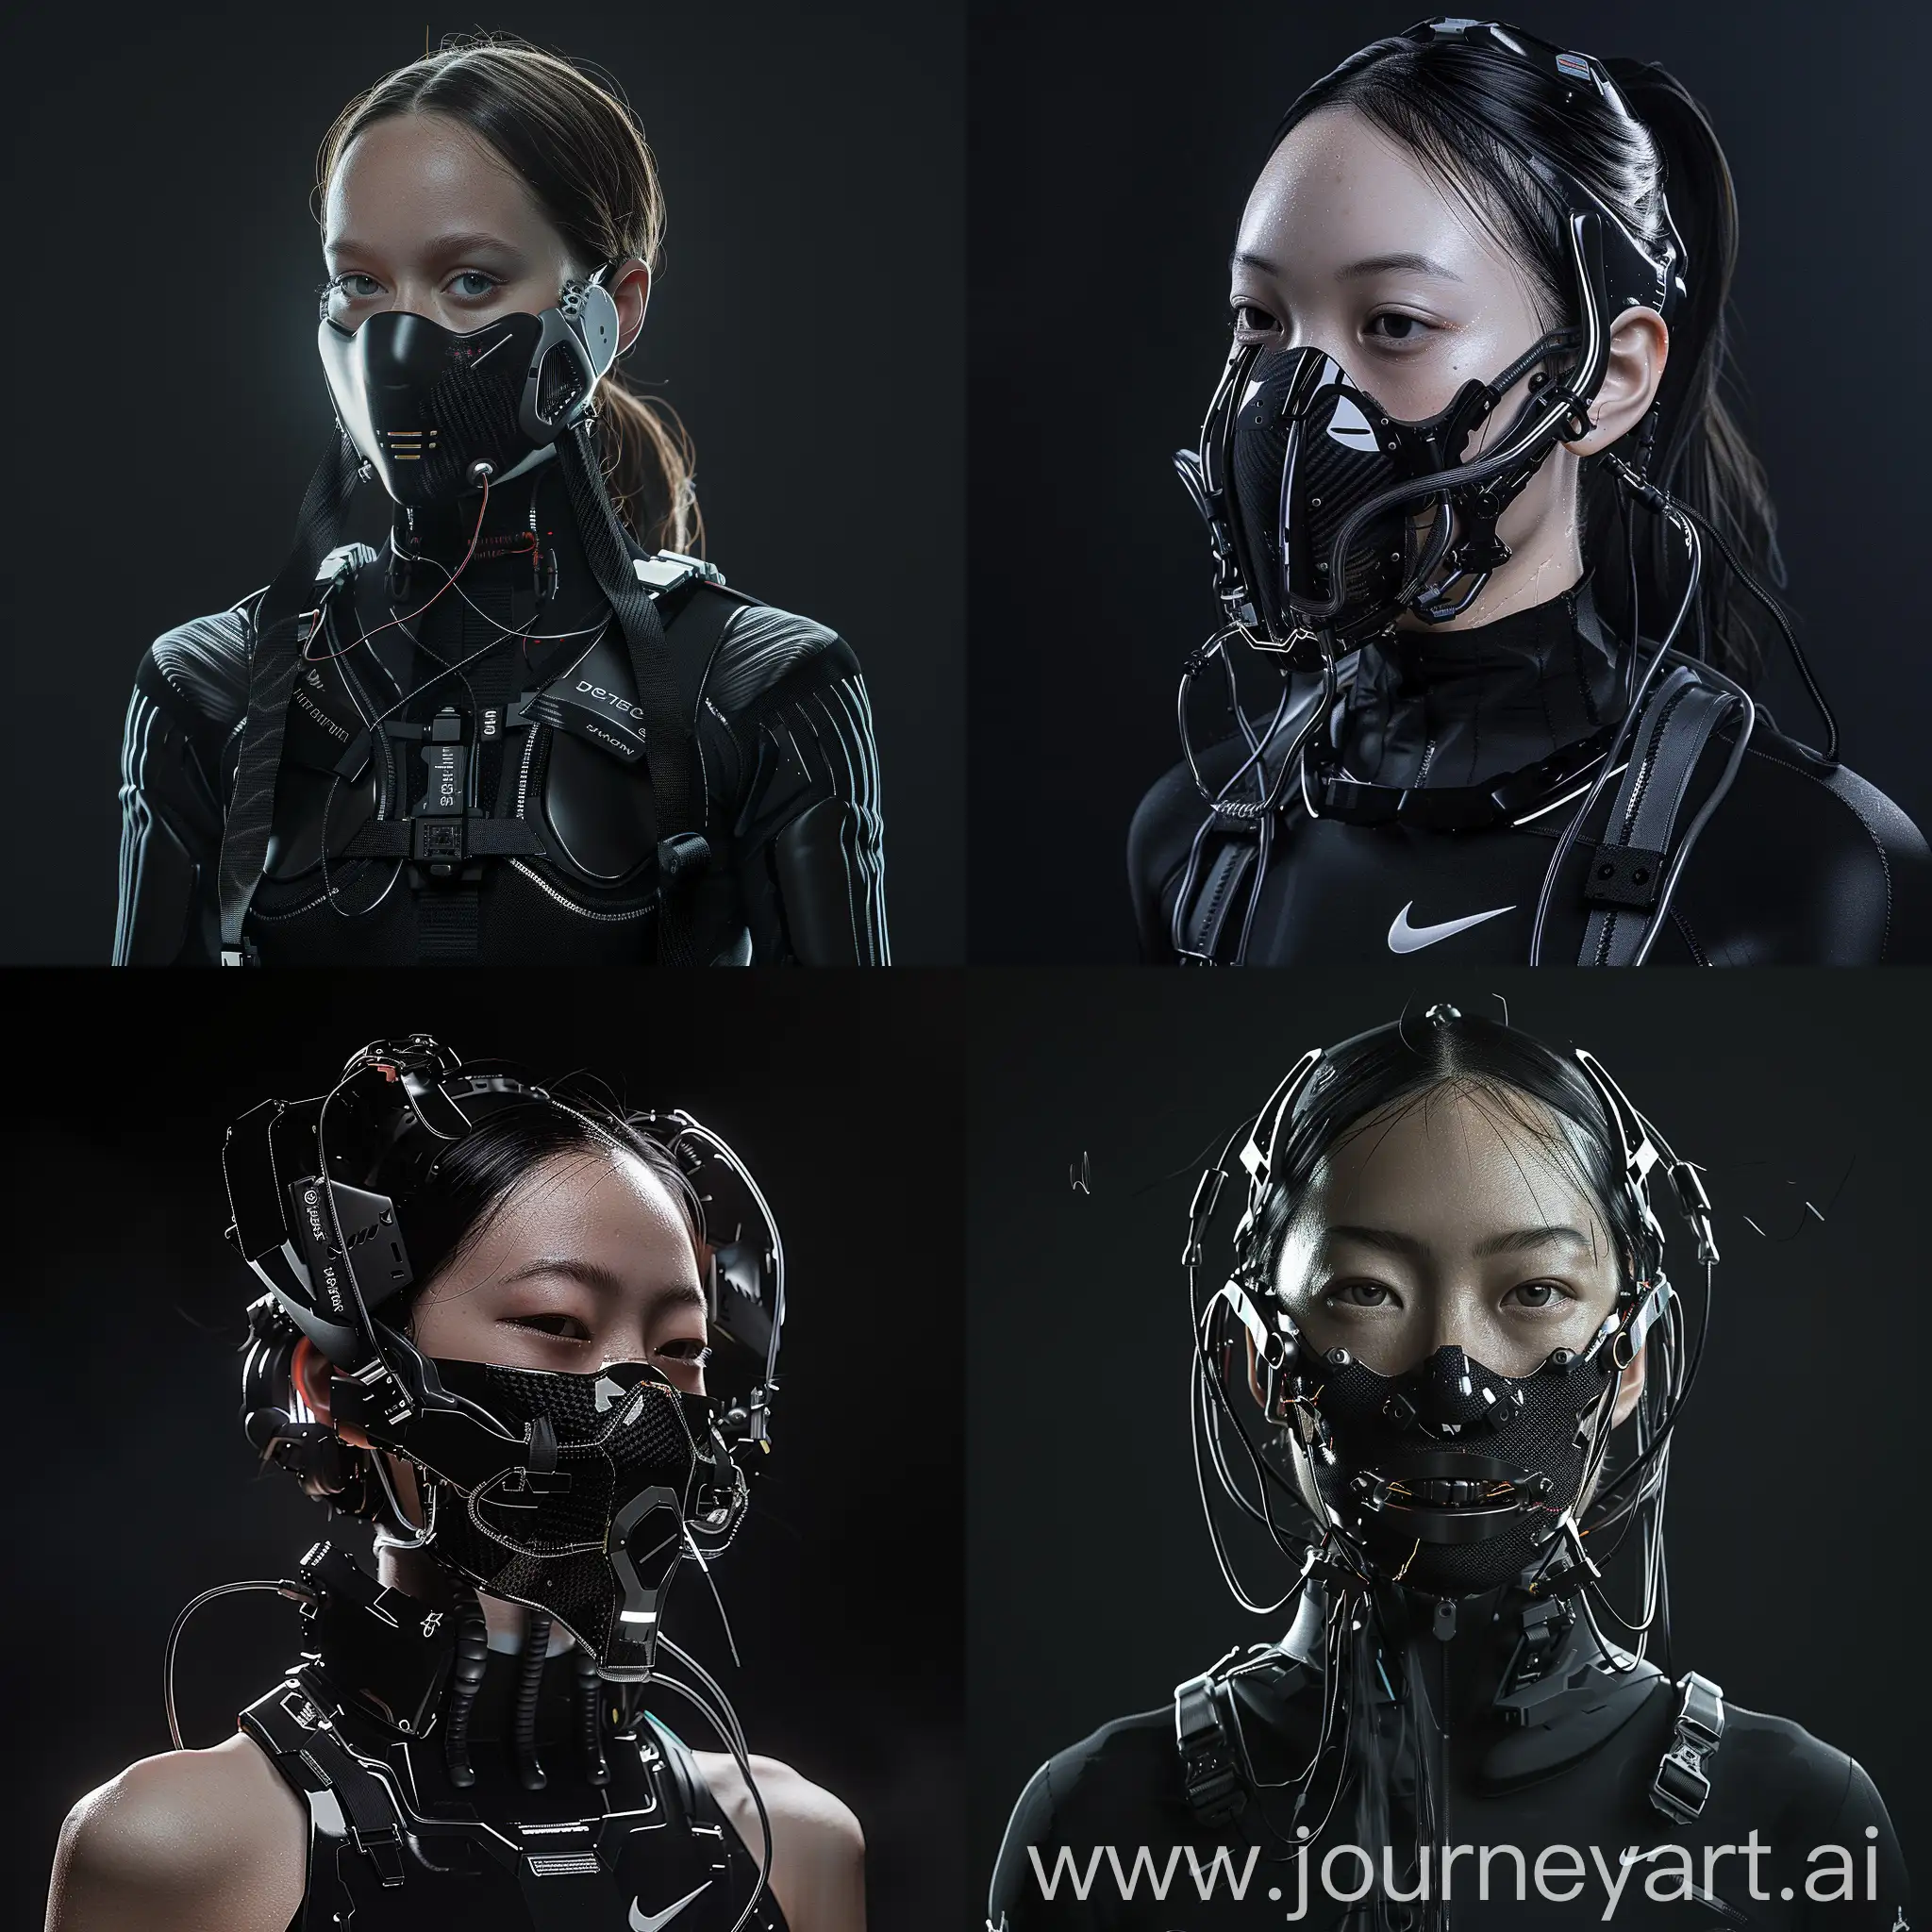 Futuristic-Cyberpunk-Character-with-Nikeinspired-Accessories-in-Dynamic-Action